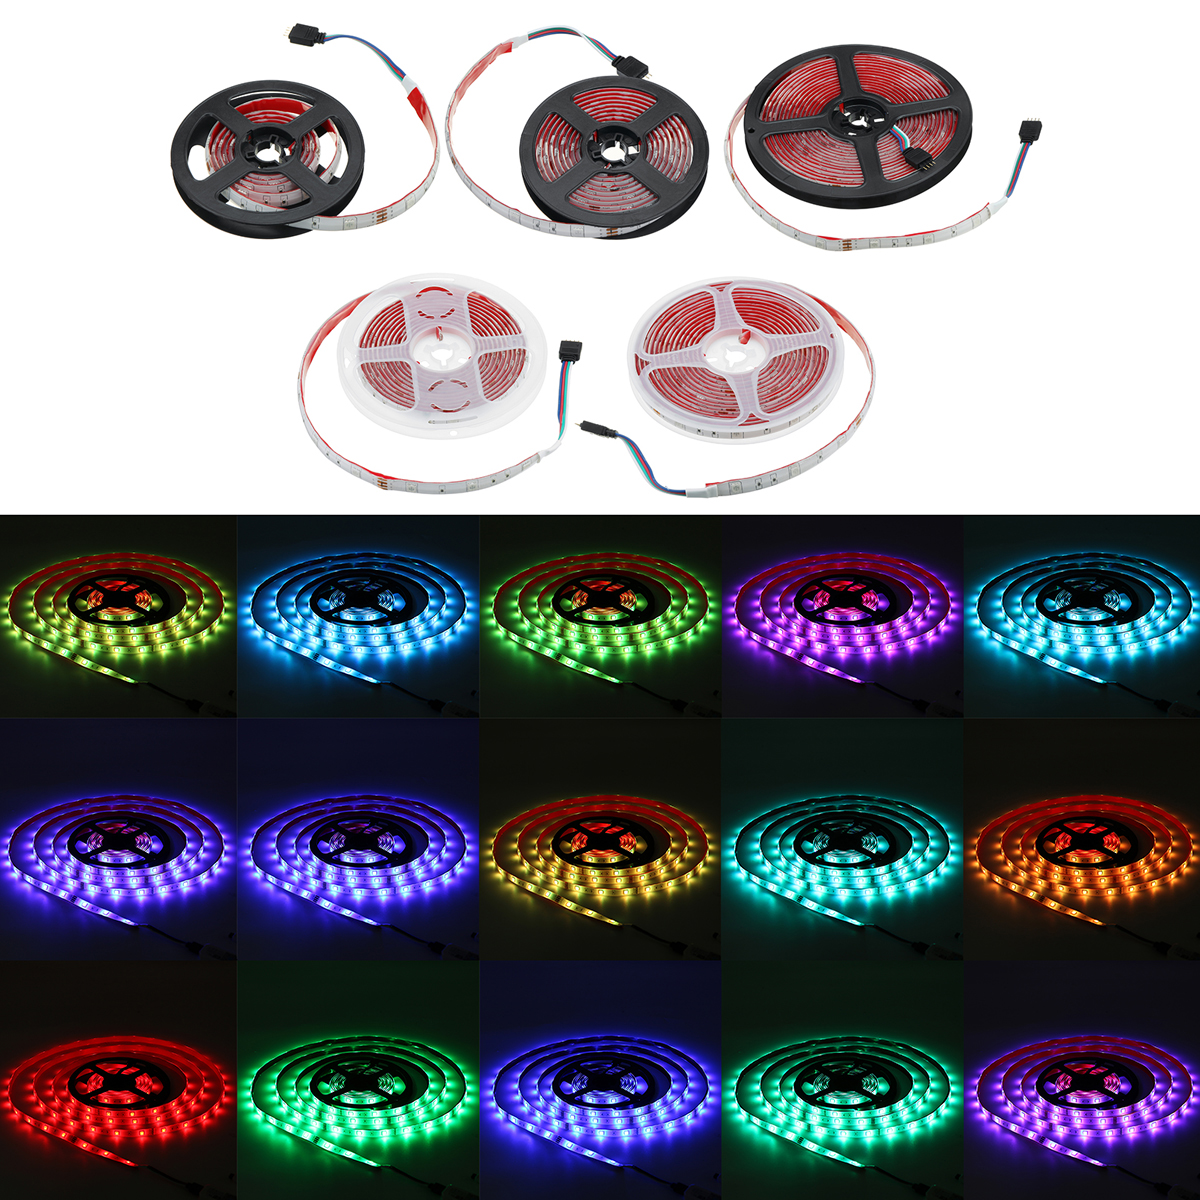 Find 12V 5050 SMD RGB WIFI Wireless Strip Light 150LED Alexa Smart Home Waterproof IP65 for Sale on Gipsybee.com with cryptocurrencies